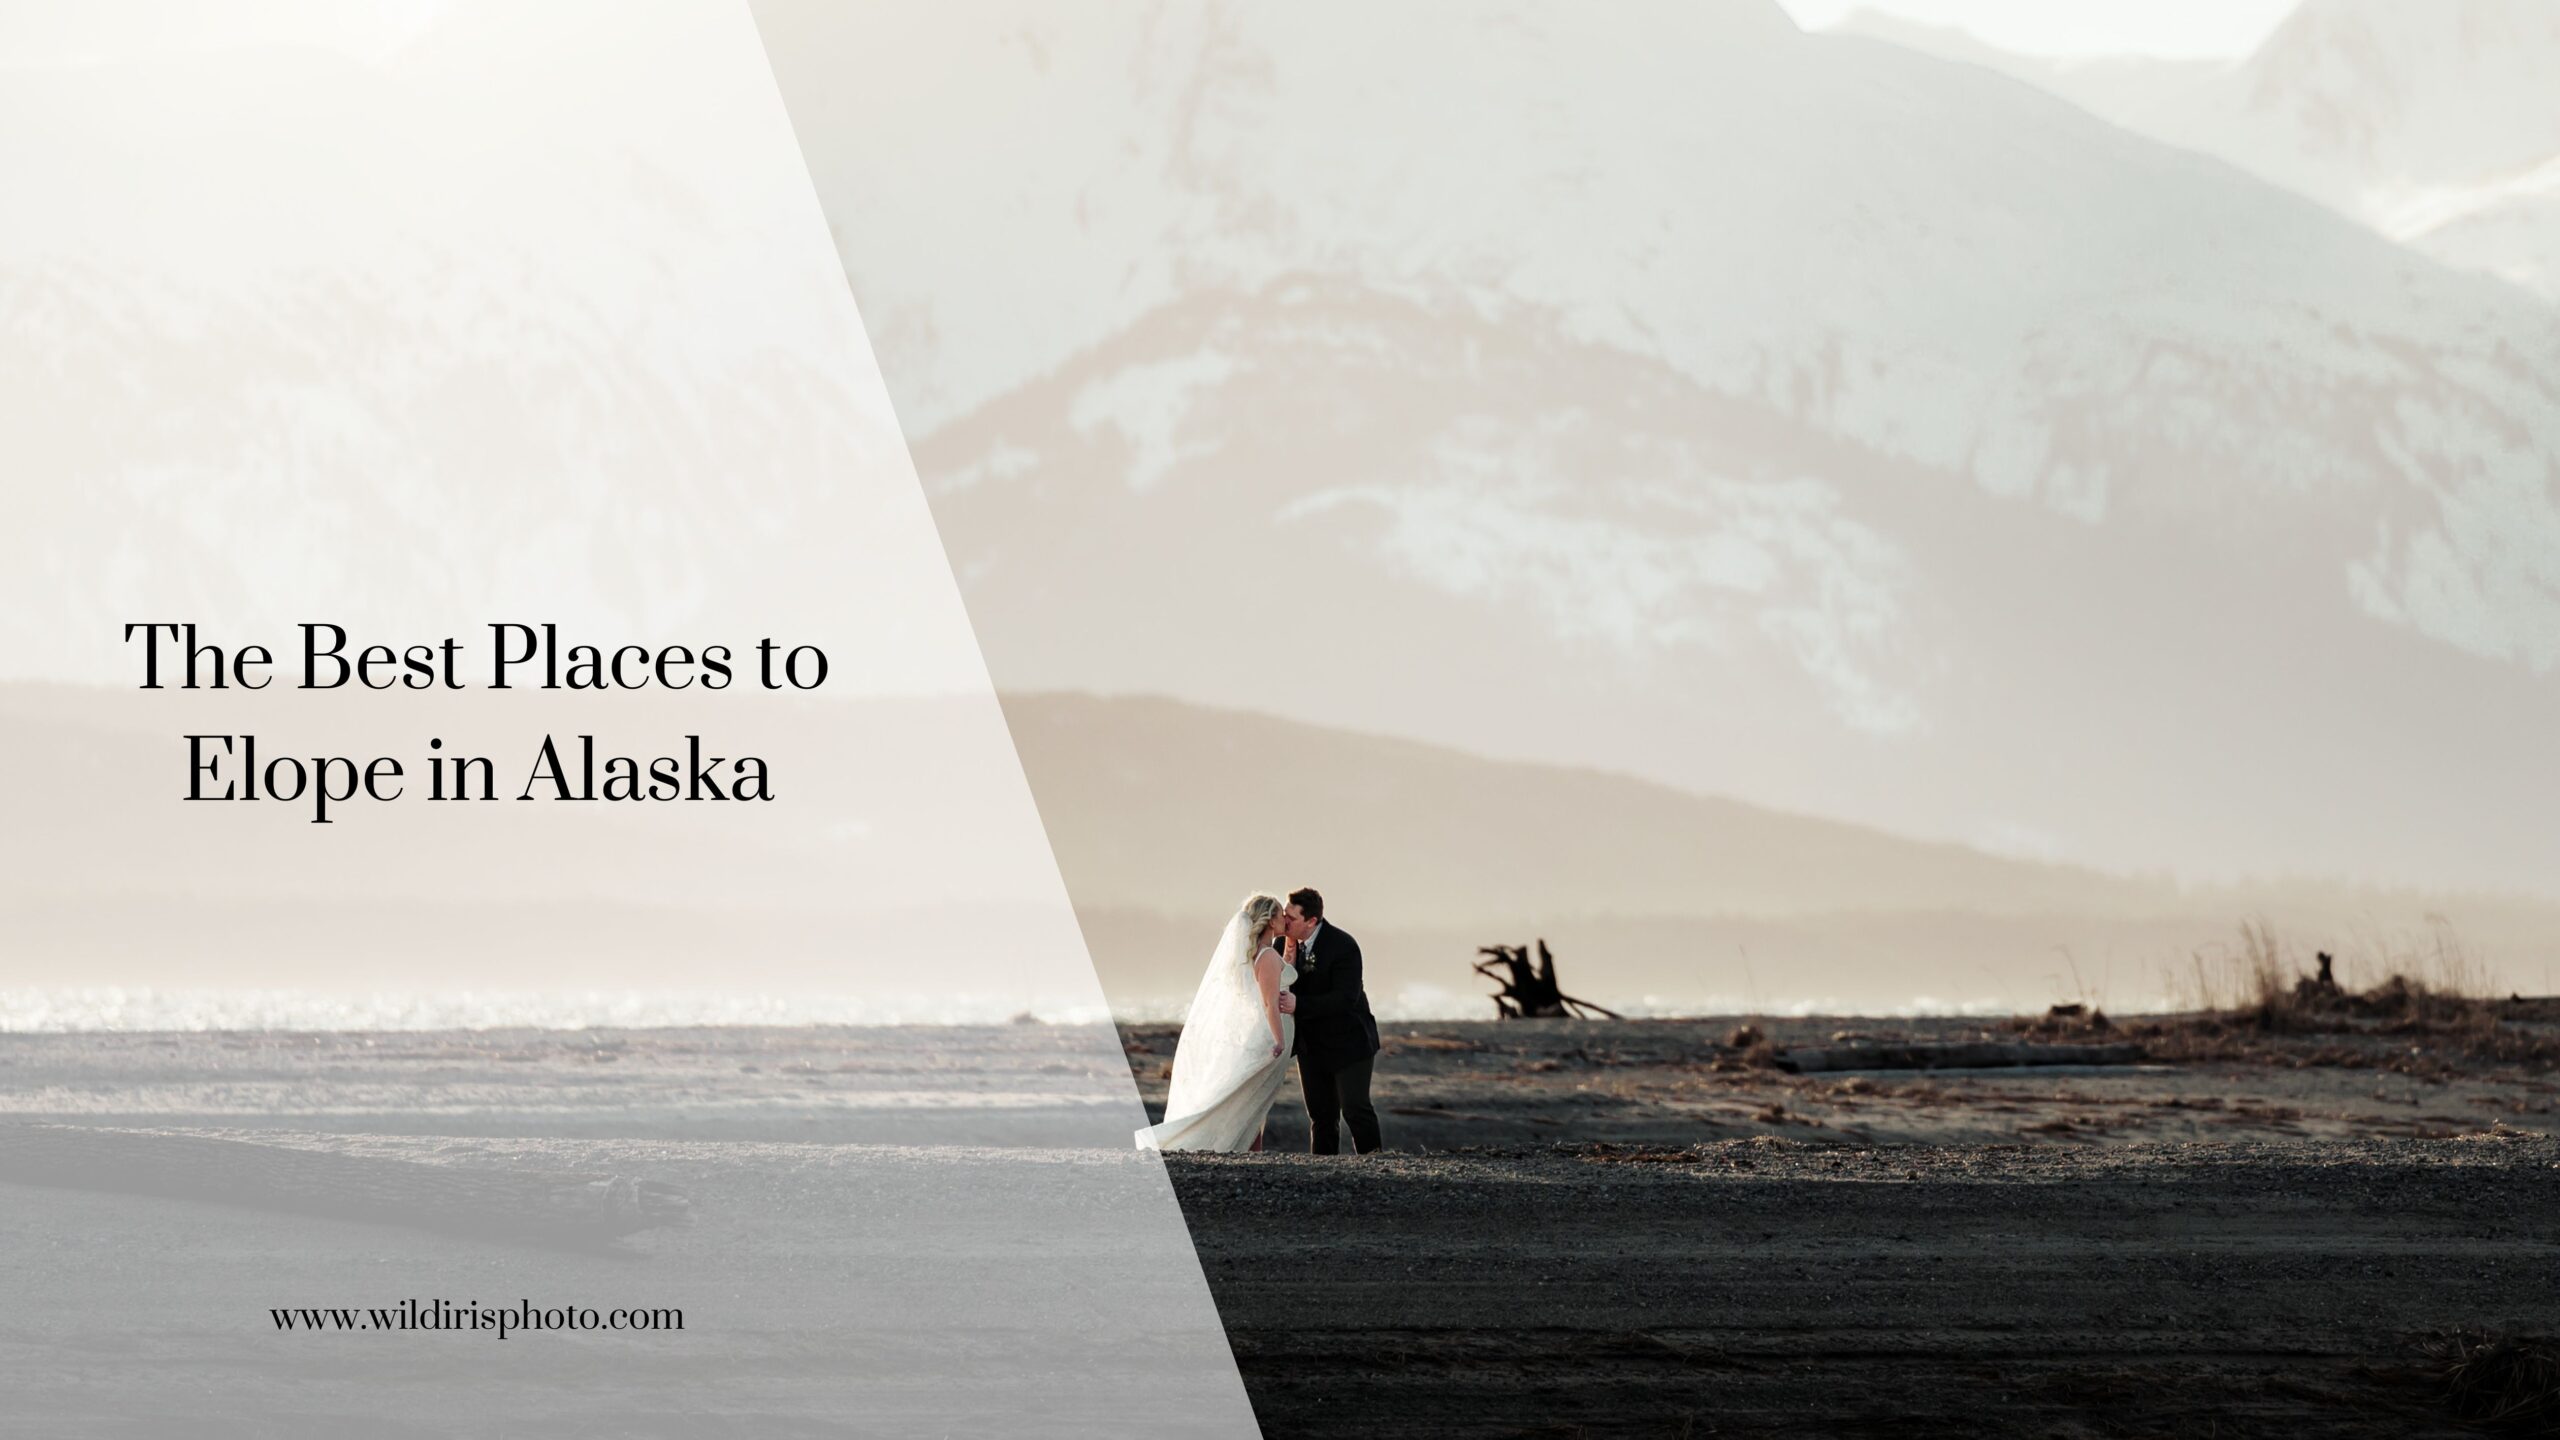 cover image for blog post on the best places to elope in alaska